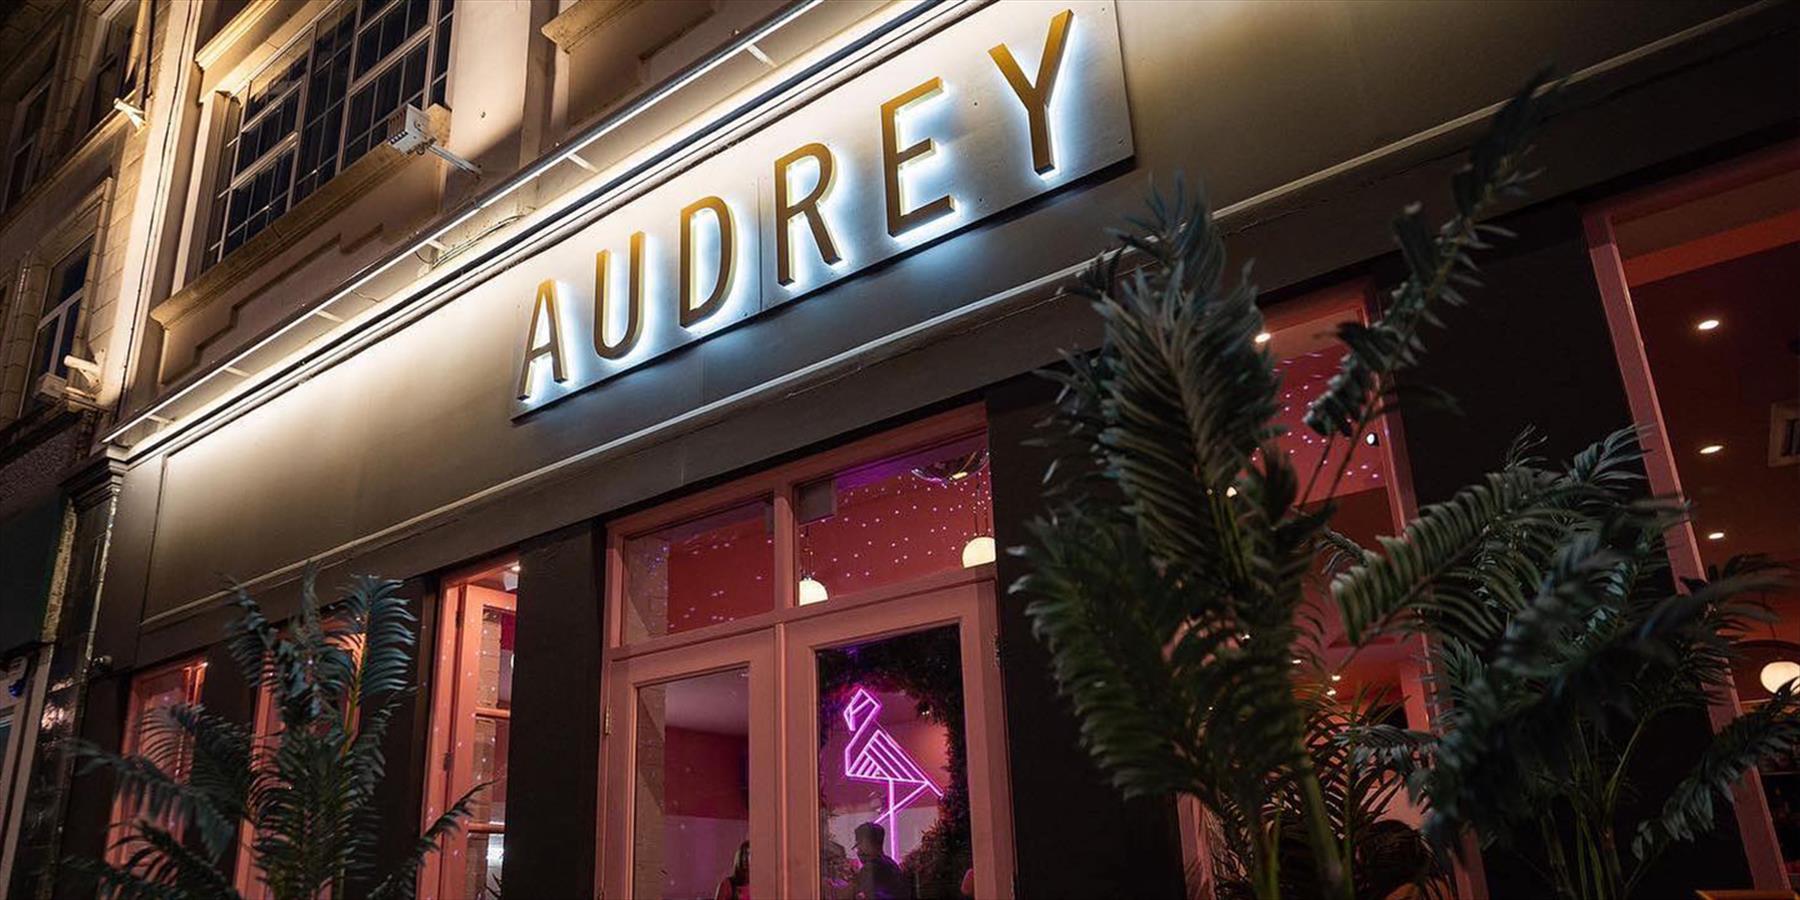 Outside of Audrey bar